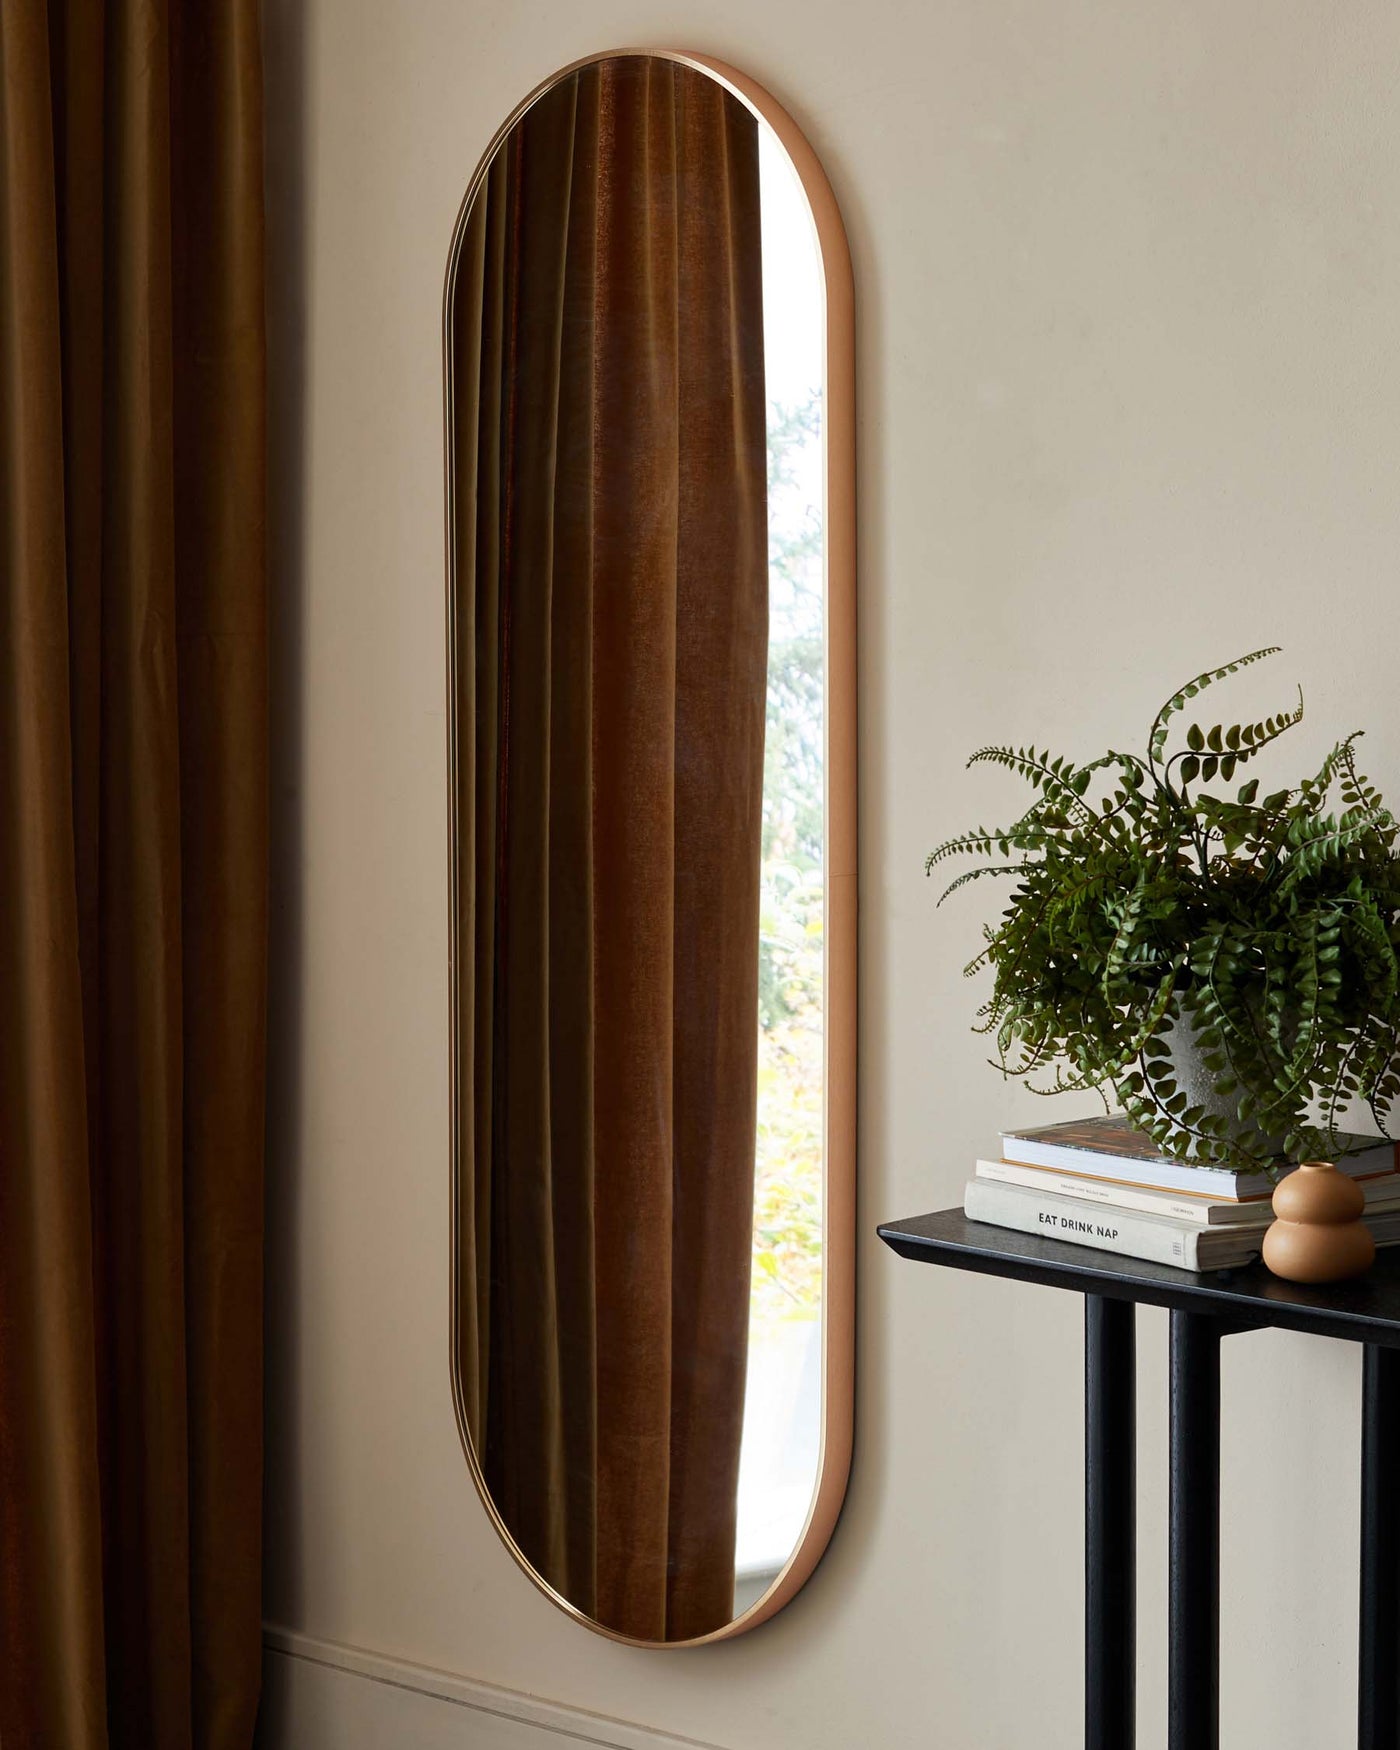 A contemporary, narrow console table with a black metal frame and a smooth, circular top surface, positioned against a light-coloured wall beside an elongated, archtop mirror with a thin, gold-coloured frame. The table is styled with a small stack of books and a decorative spherical object, accompanied by a potted fern to the side.